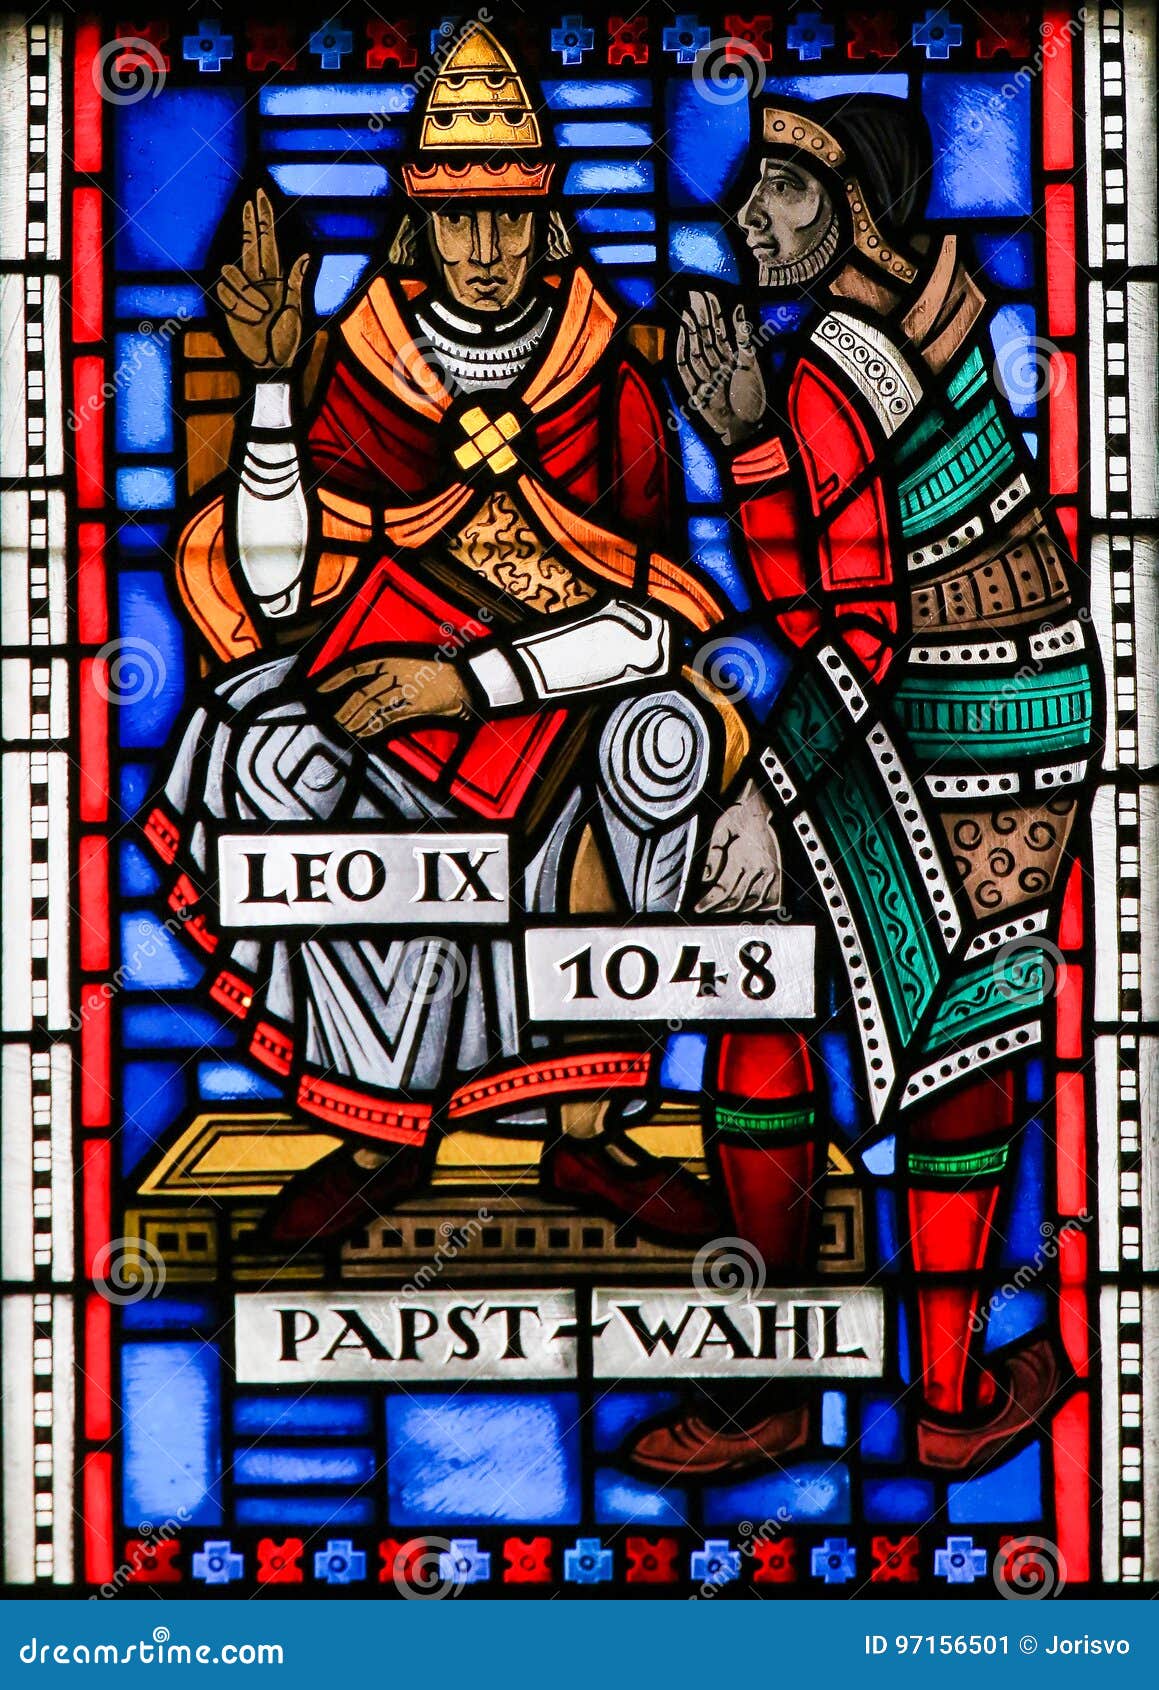 stained glass in worms - pope leo ix